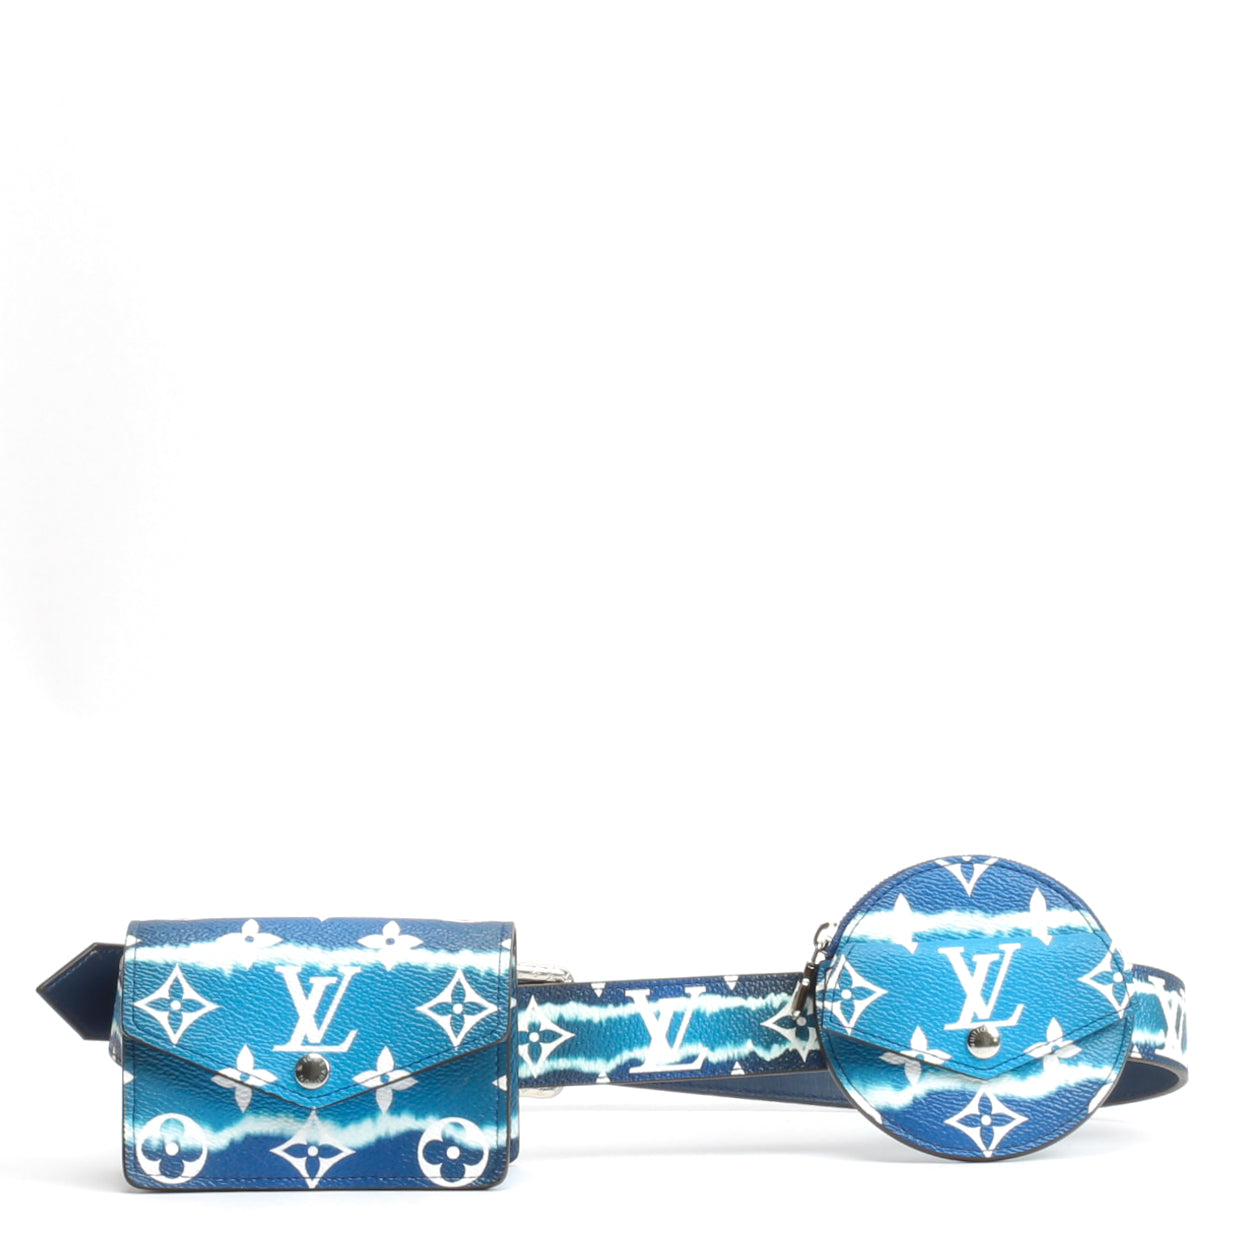 Products by Louis Vuitton: LV Iconic 30mm Reversible Belt